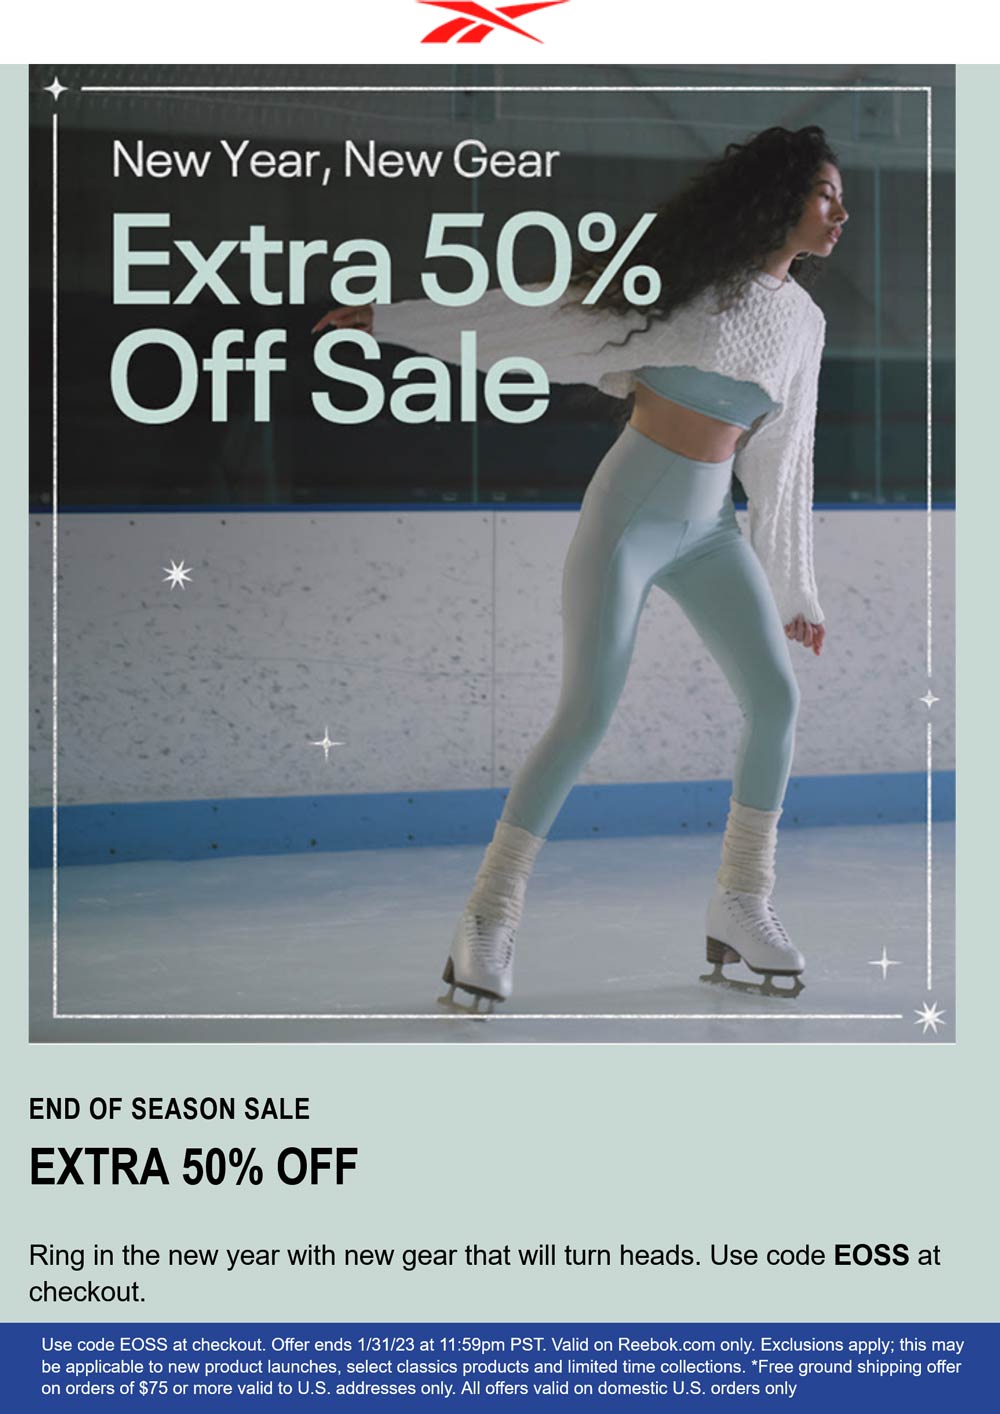 Reebok coupons & promo code for [February 2023]